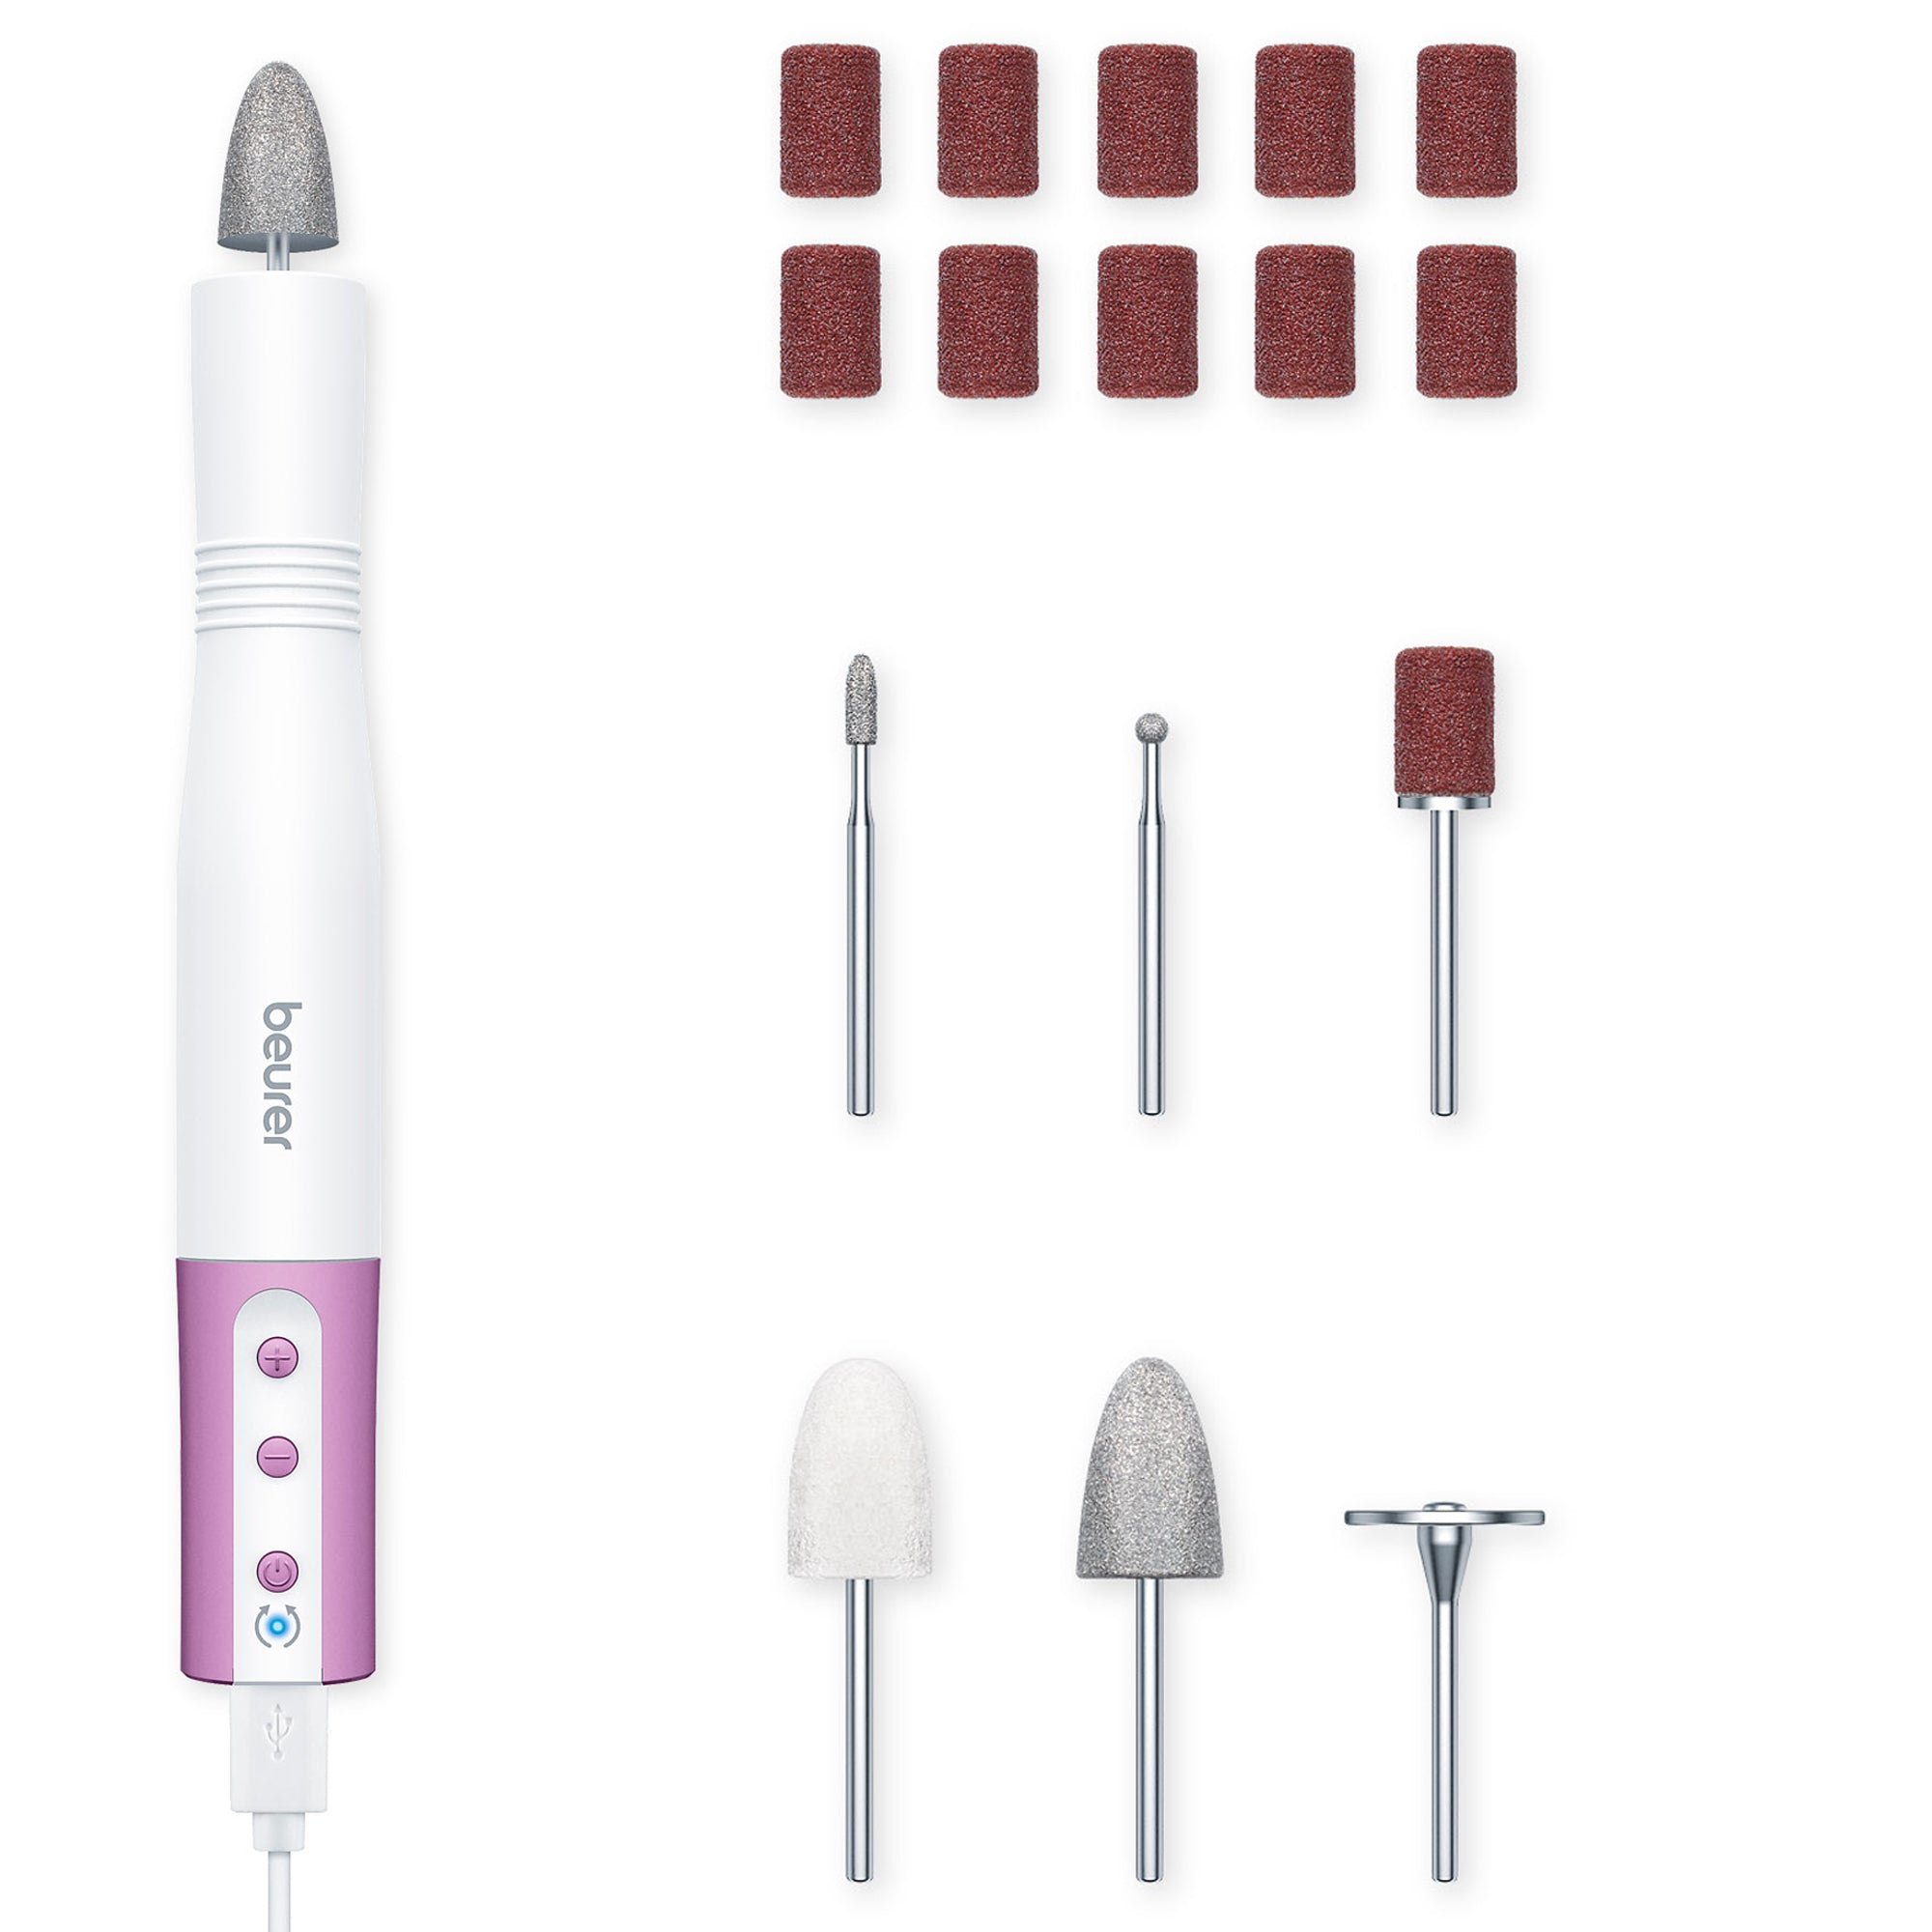 17-piece Travel Professional Manicure & Kit, – Drill America North Nail Beurer MP52 Pedicure